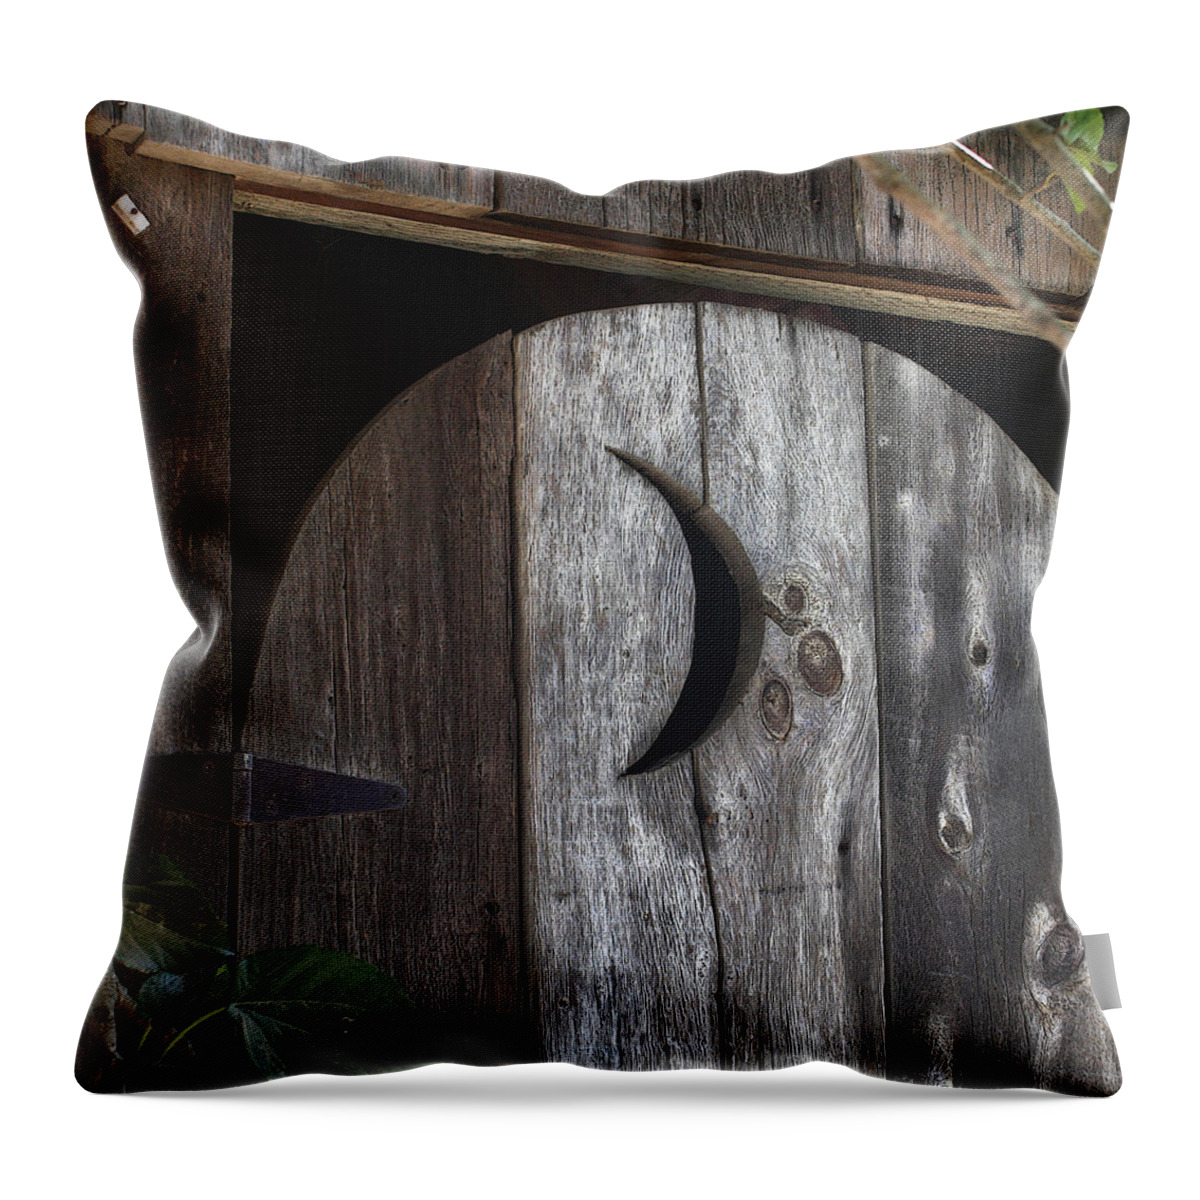 Outhouse Throw Pillow featuring the photograph Outhouse Door by Art Block Collections